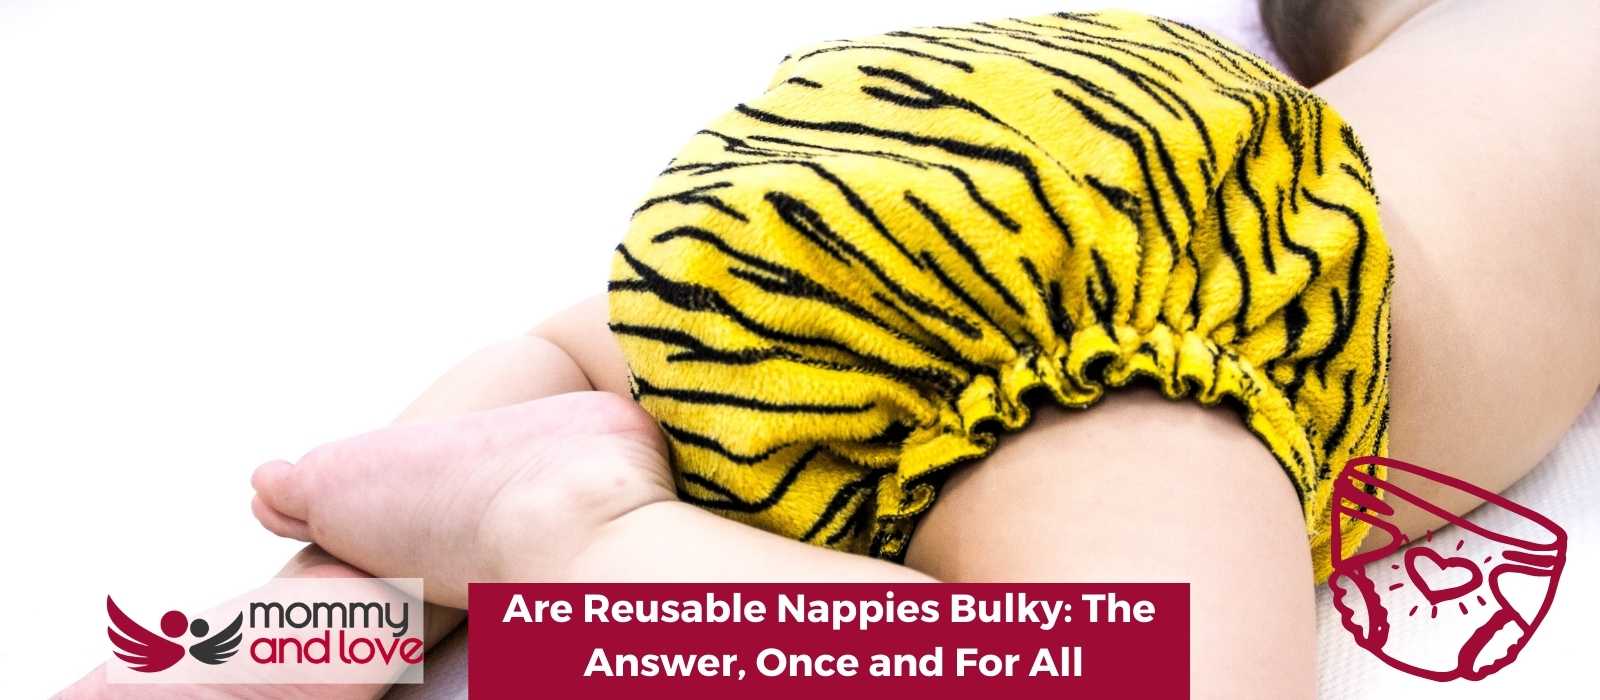 Are Reusable Nappies Bulky The Answer, Once and For All